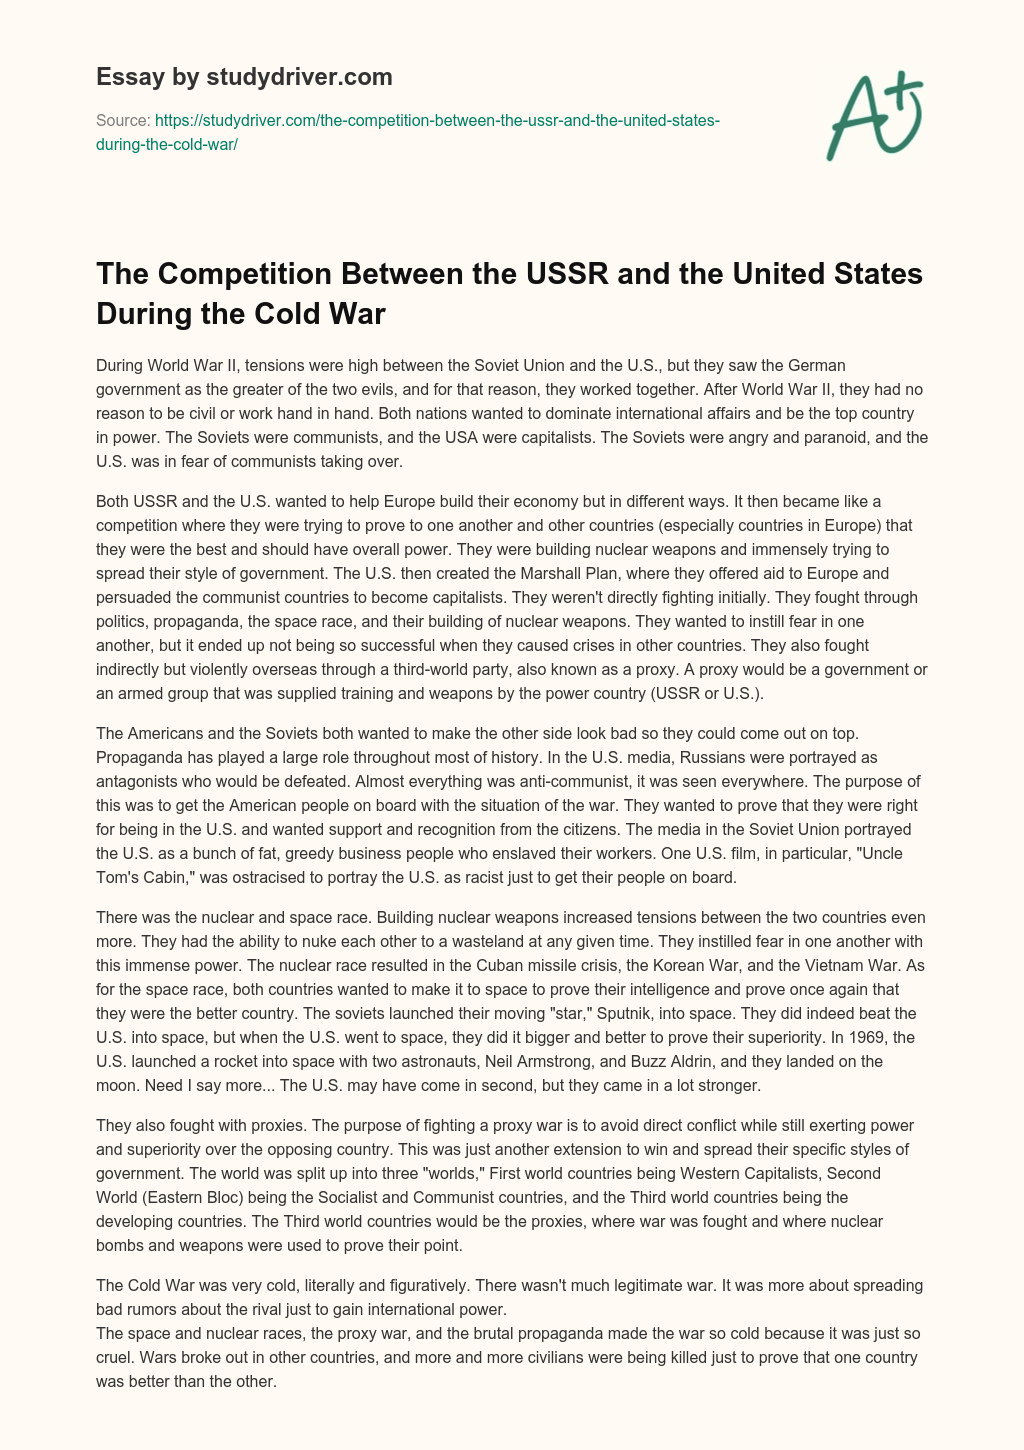 The Competition between the USSR and the United States during the Cold War essay